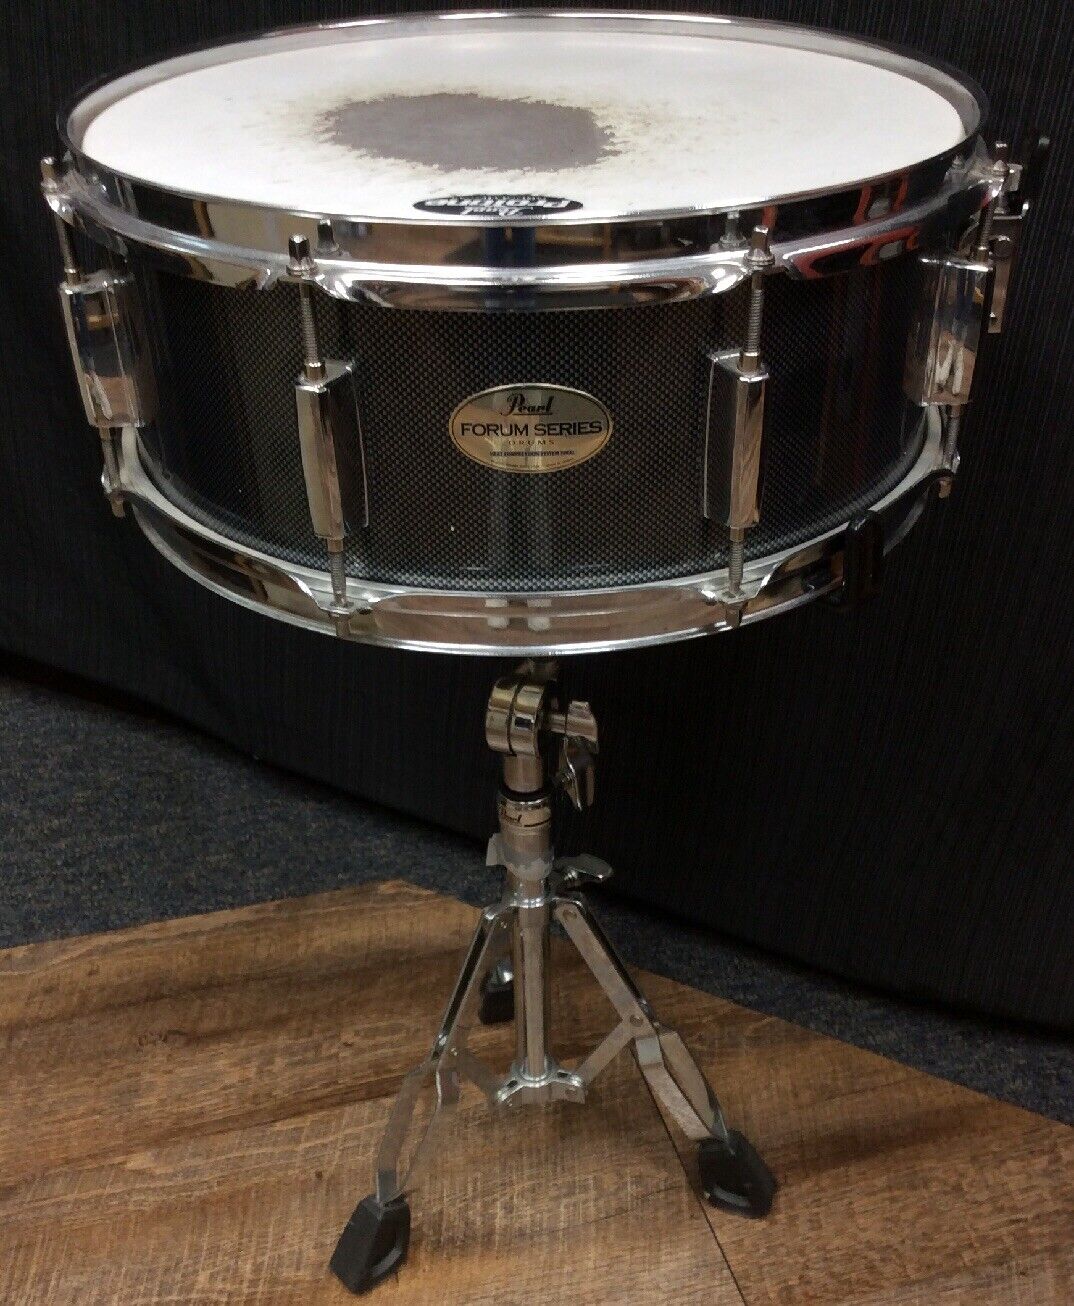 PEARL FORUM SERIES SNARE 14” x 5”